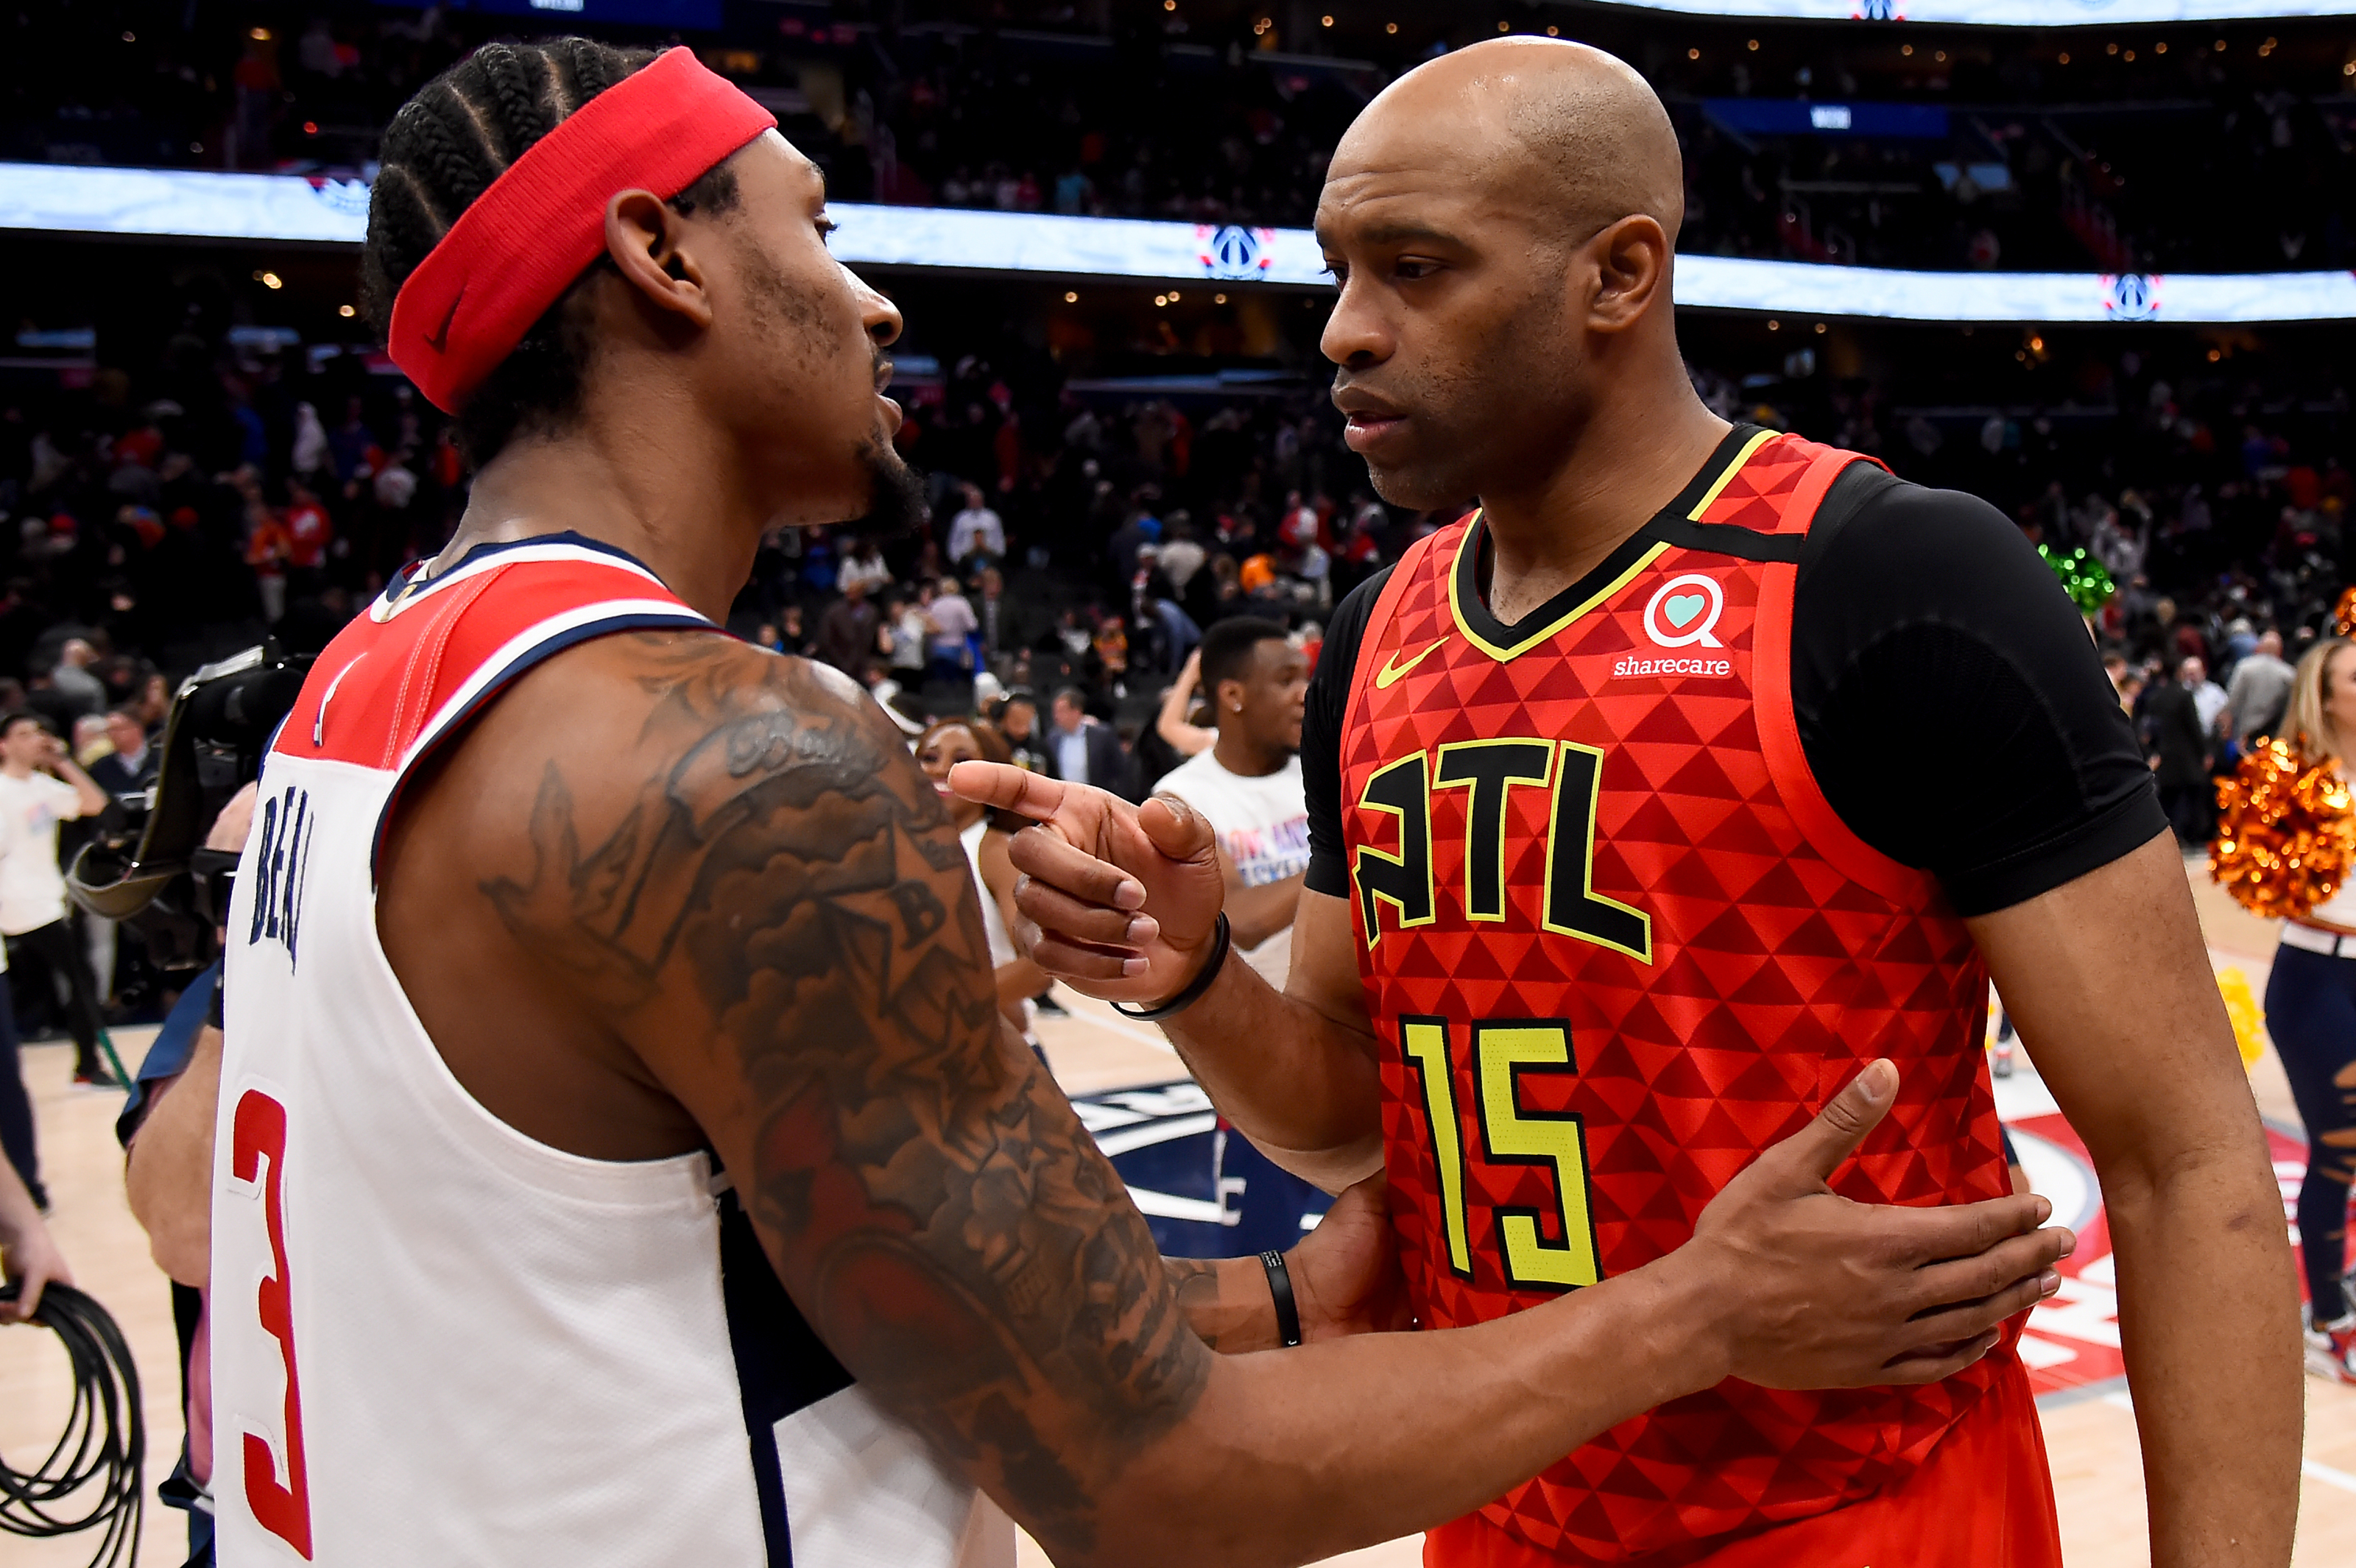 Vince Carter wants to play two more seasons in NBA - NBC Sports